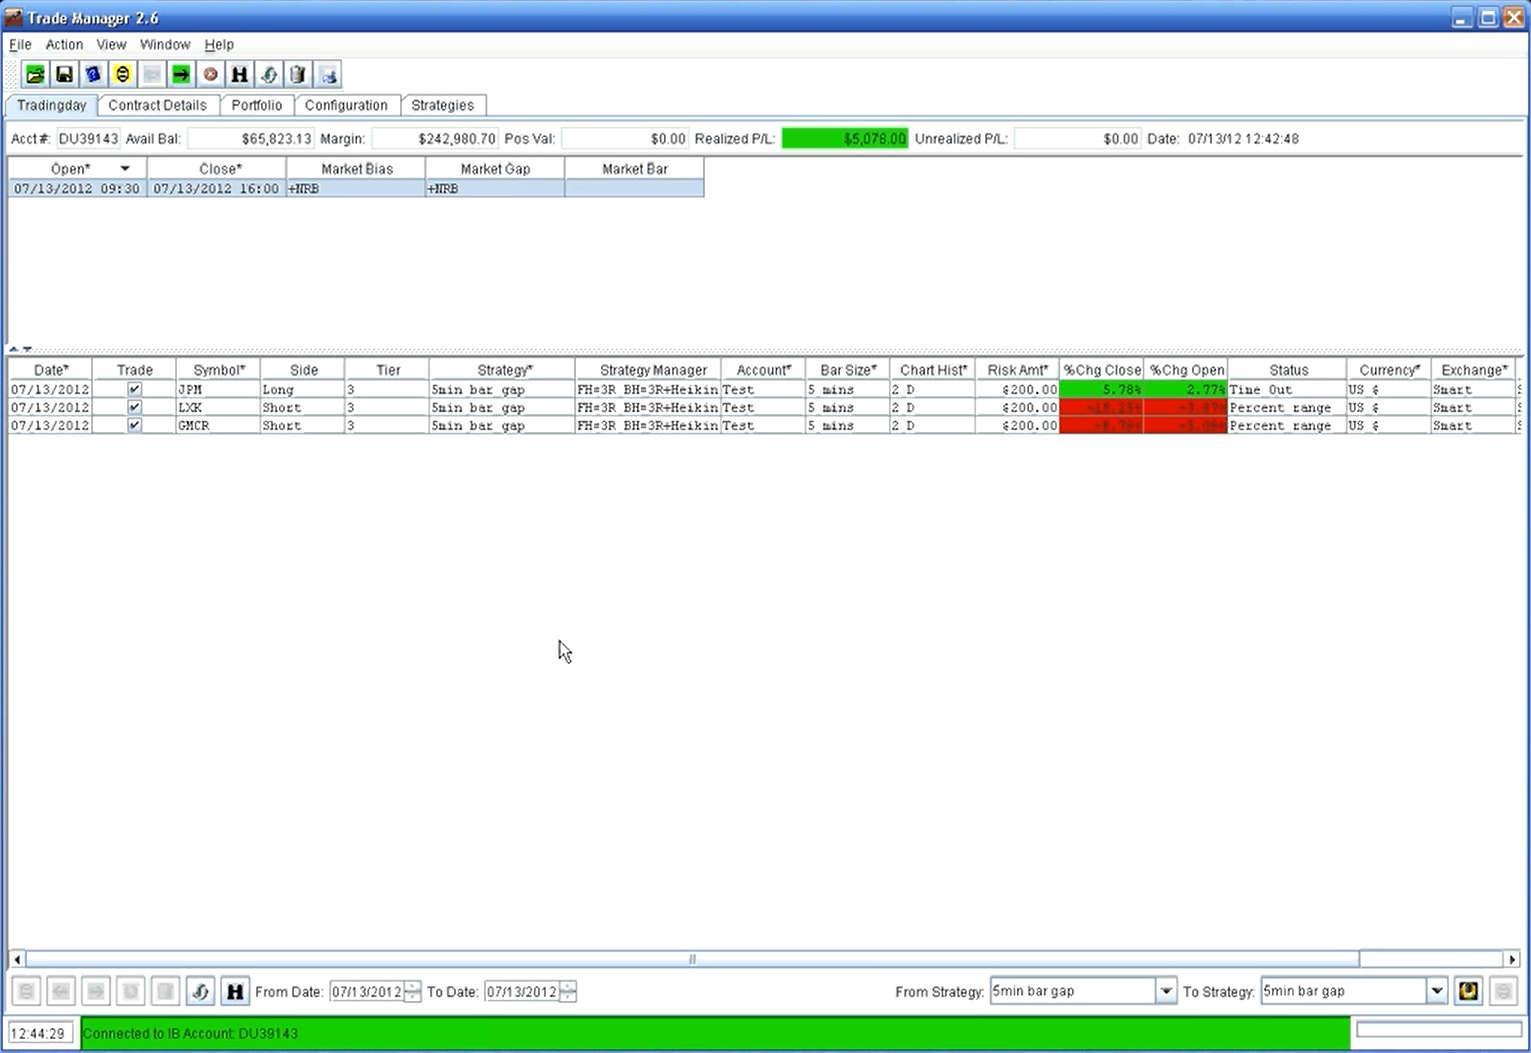 Trading Manager default window